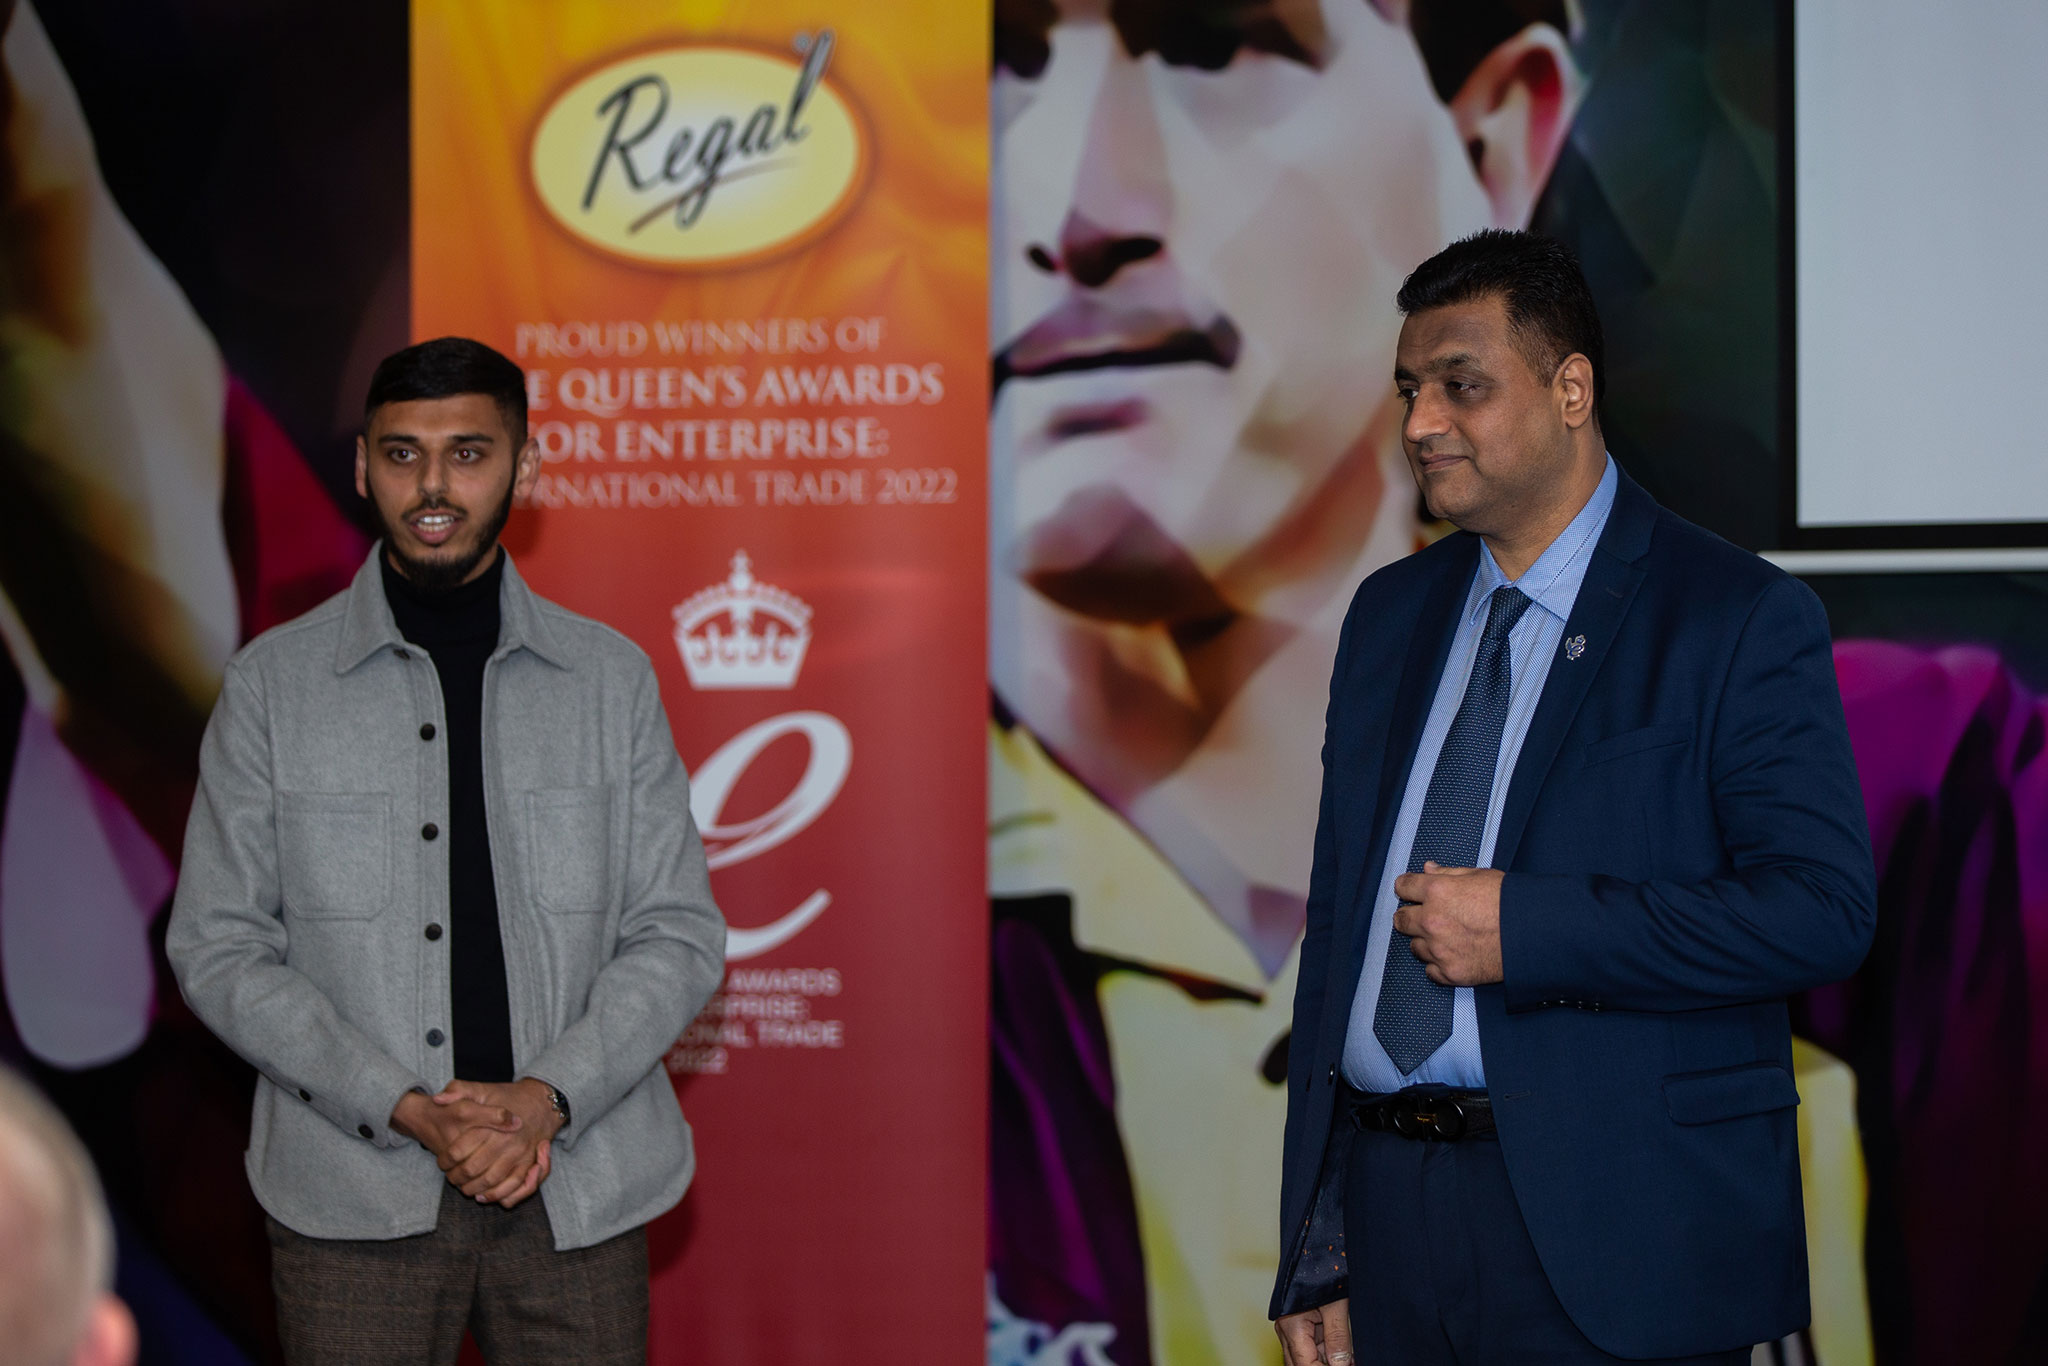 On Thursday 20 April, Regal Foods joined forces with Bradford City AFC to host a special Iftar event held at the University of Bradford Stadium.